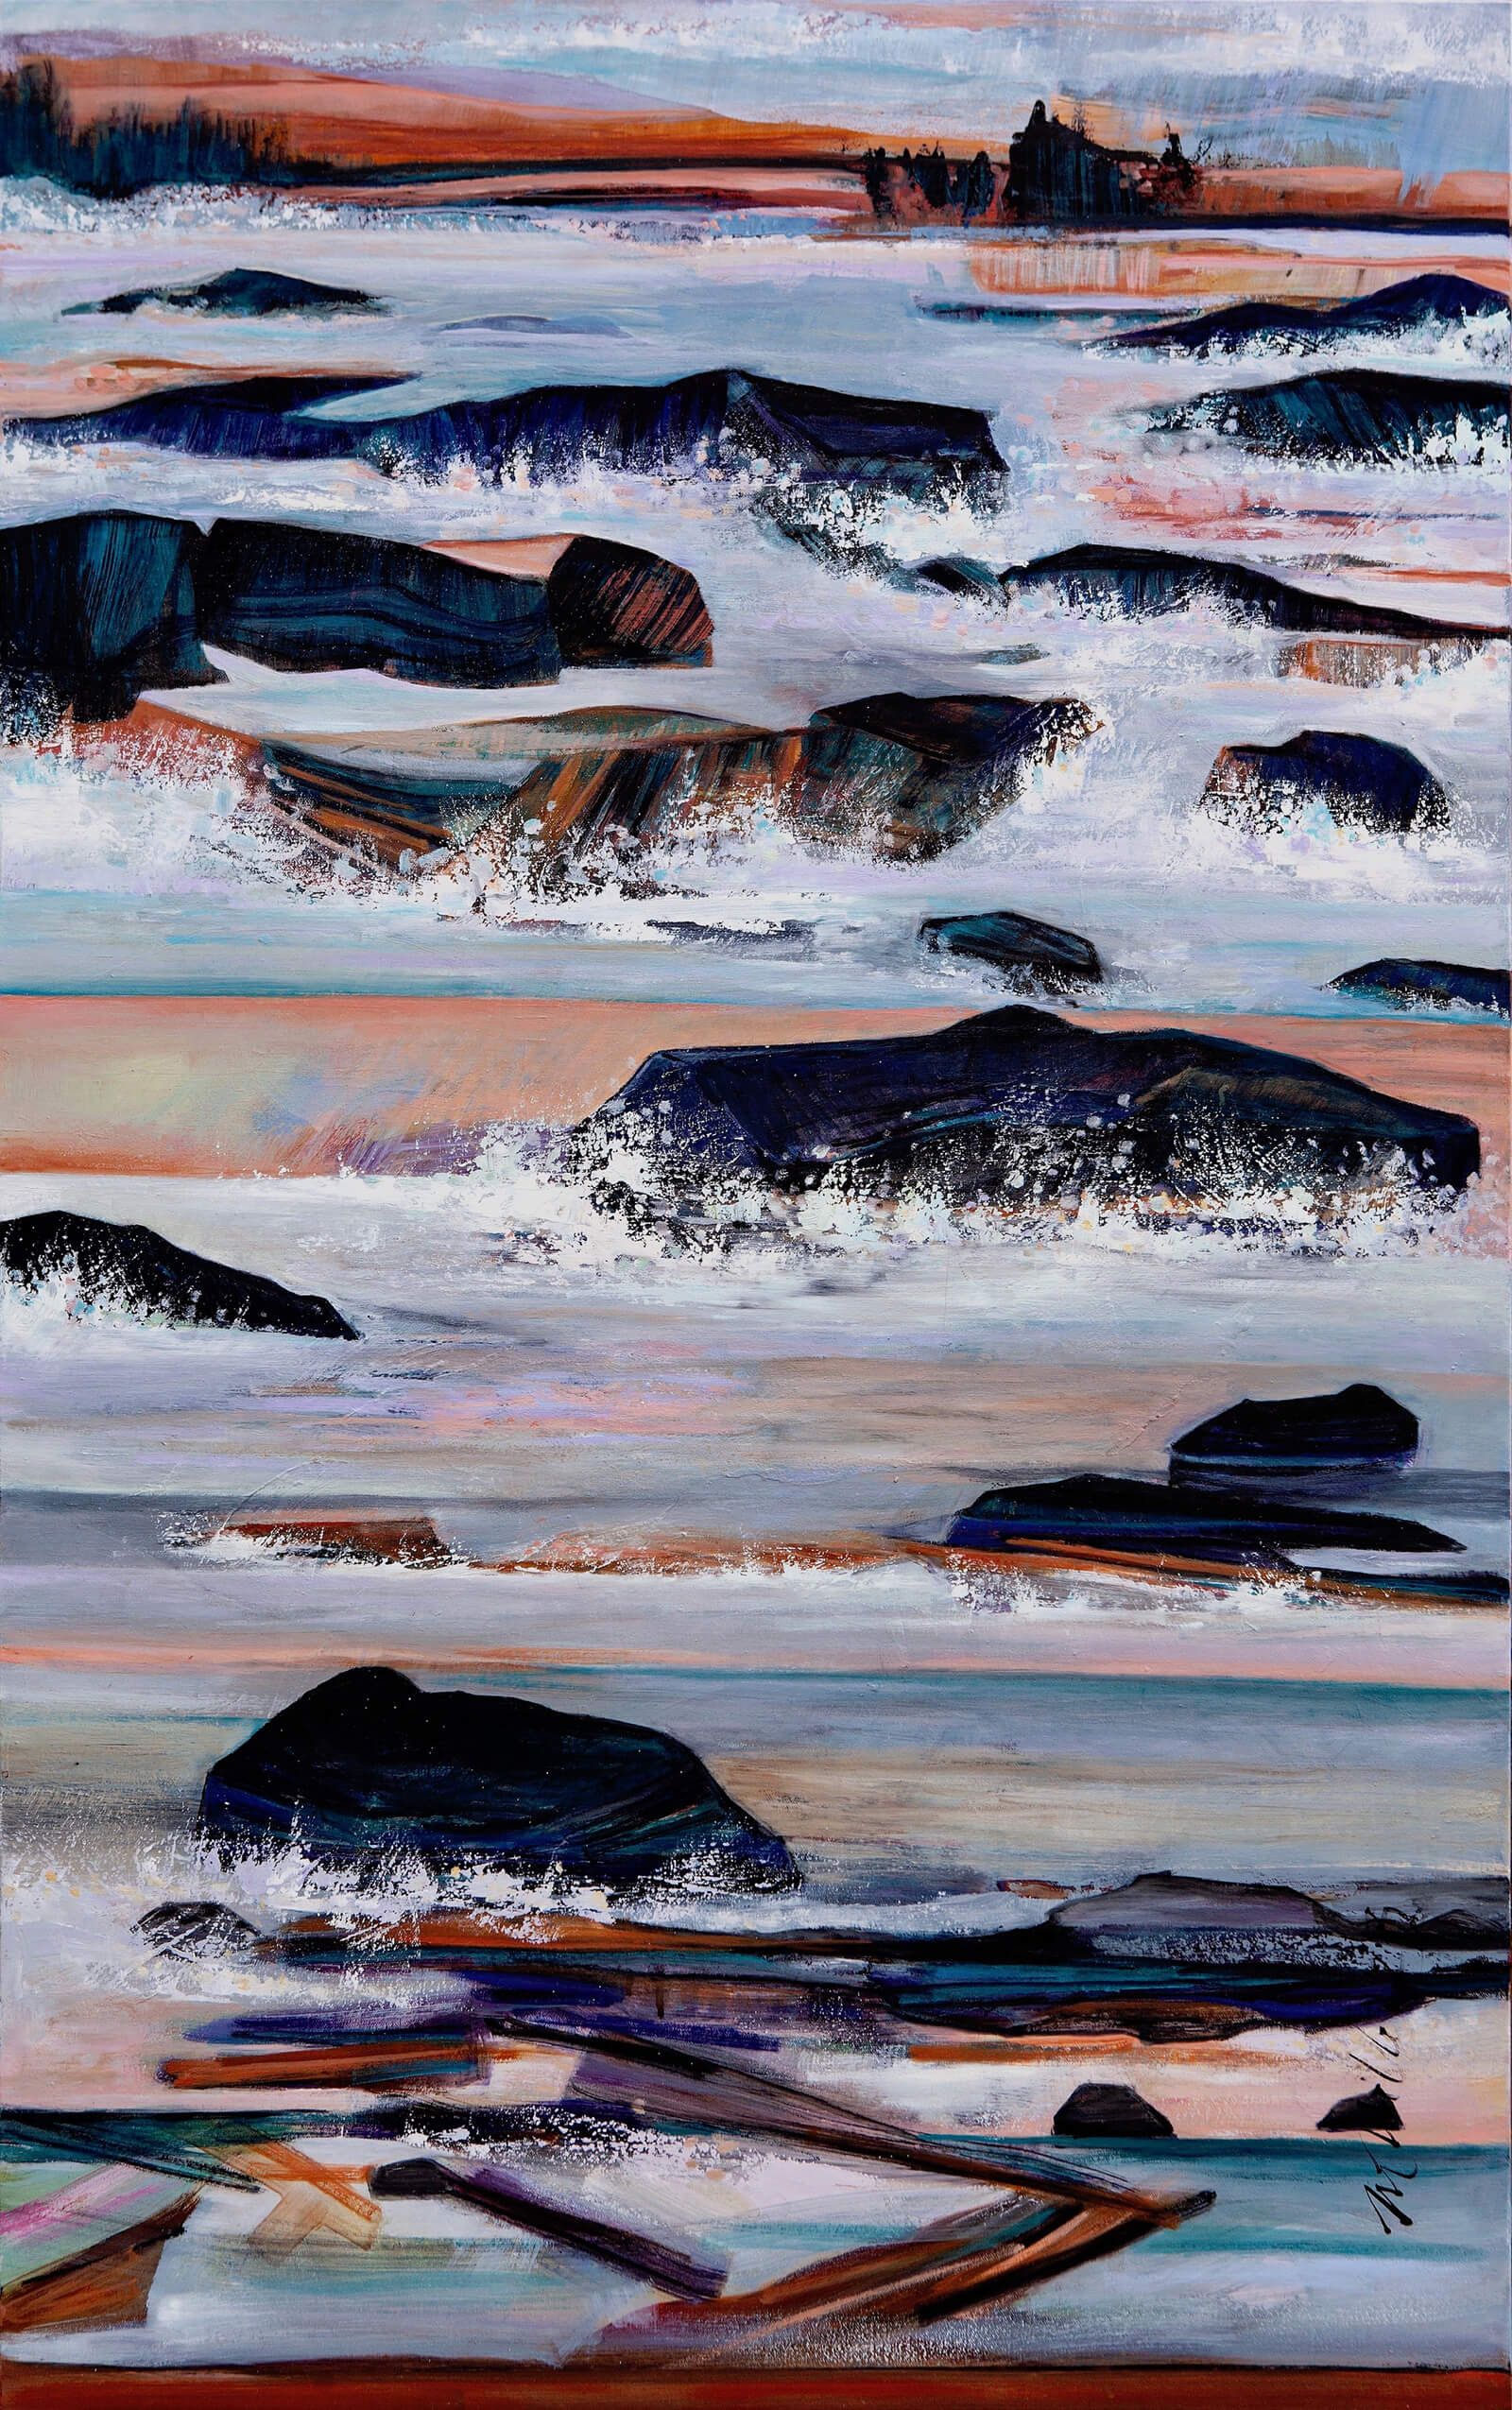 Gauging the Tides - 48x30 inches - oils and cold wax